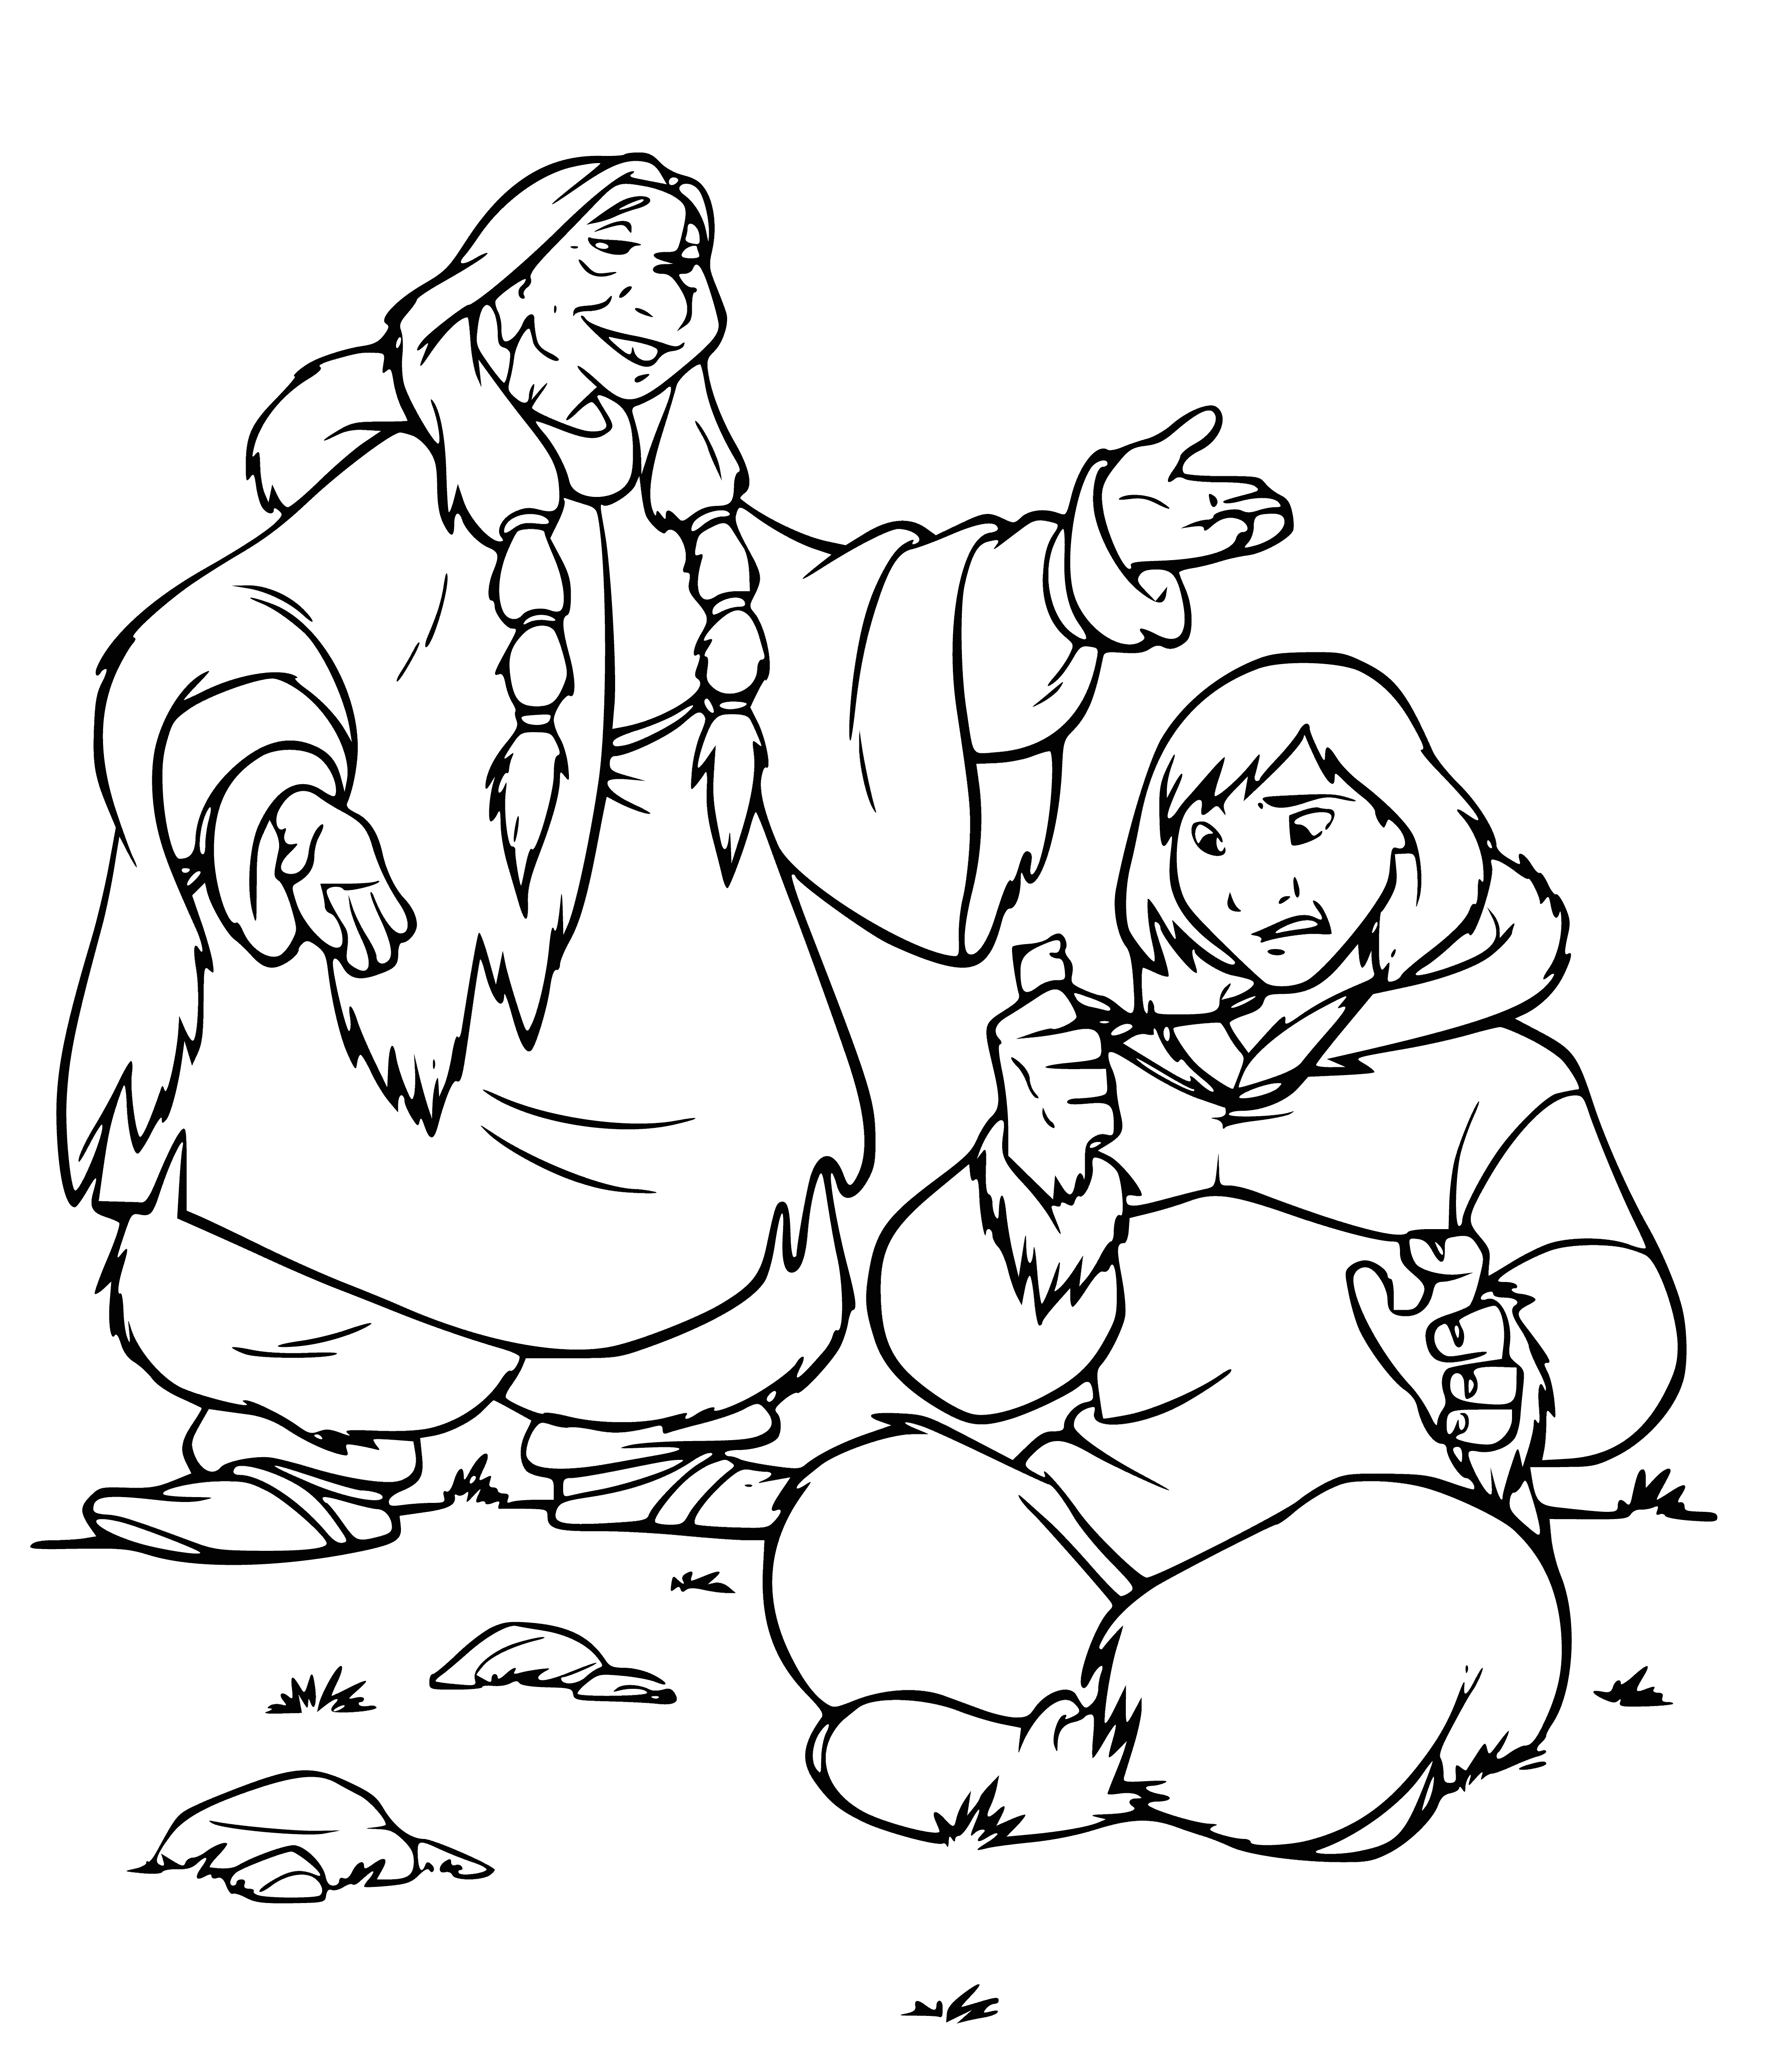 coloring page: A powerful grizzly bear surrounded by smaller animals, bearing a shaman's amulet. Respectful, awestruck expressions abound.